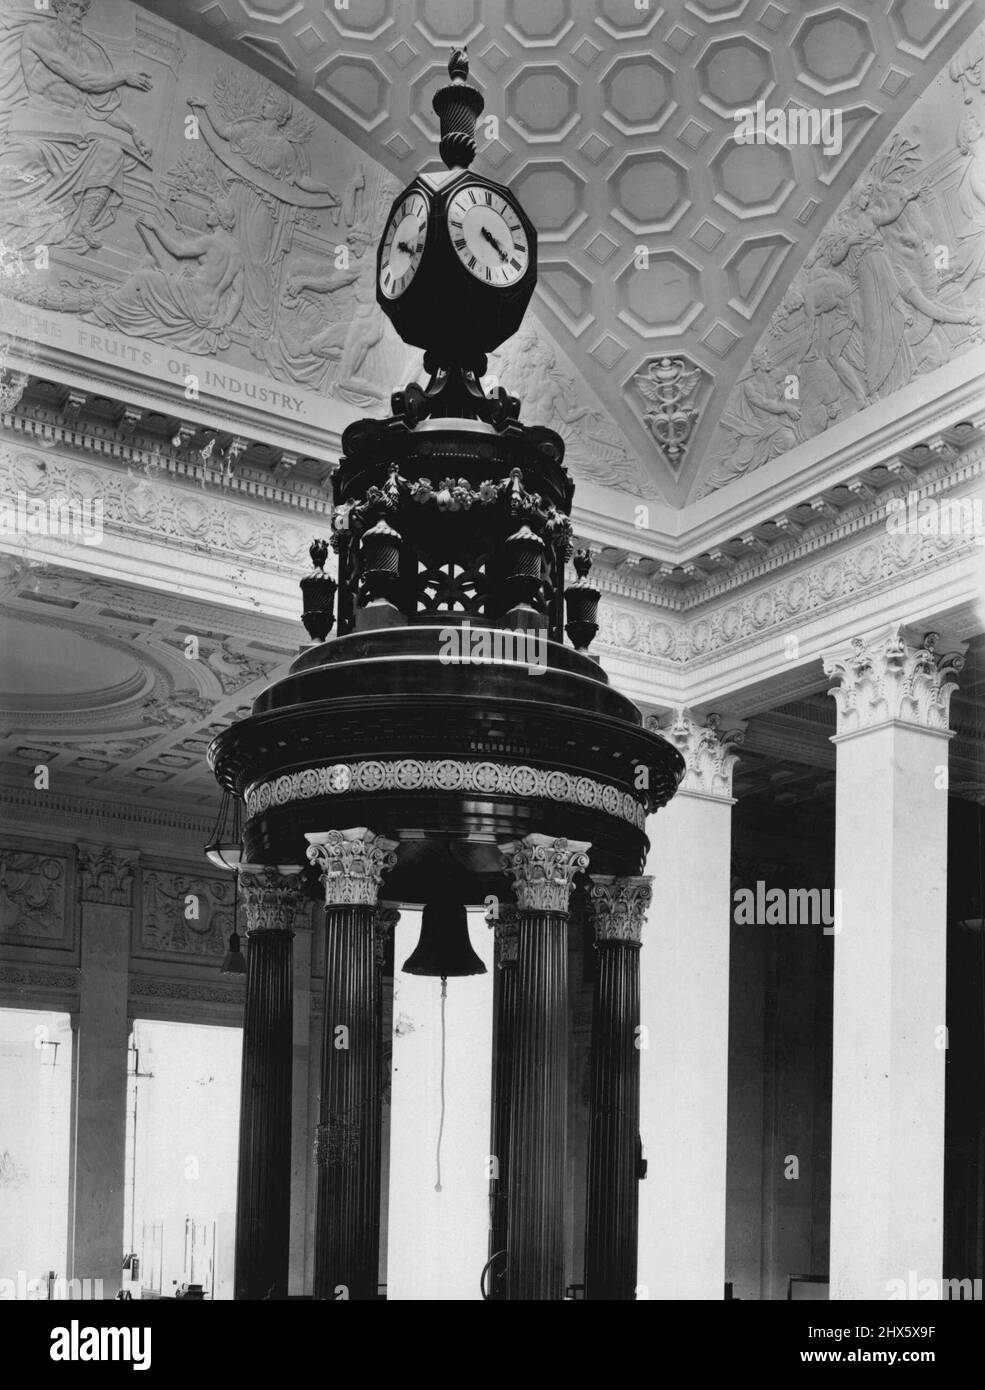 The Caller's rostrum in Lloyd's new building, with the 'Lutine' bell in its new position. October 10, 1932. (Photo by Humphrey Joel). Stock Photo